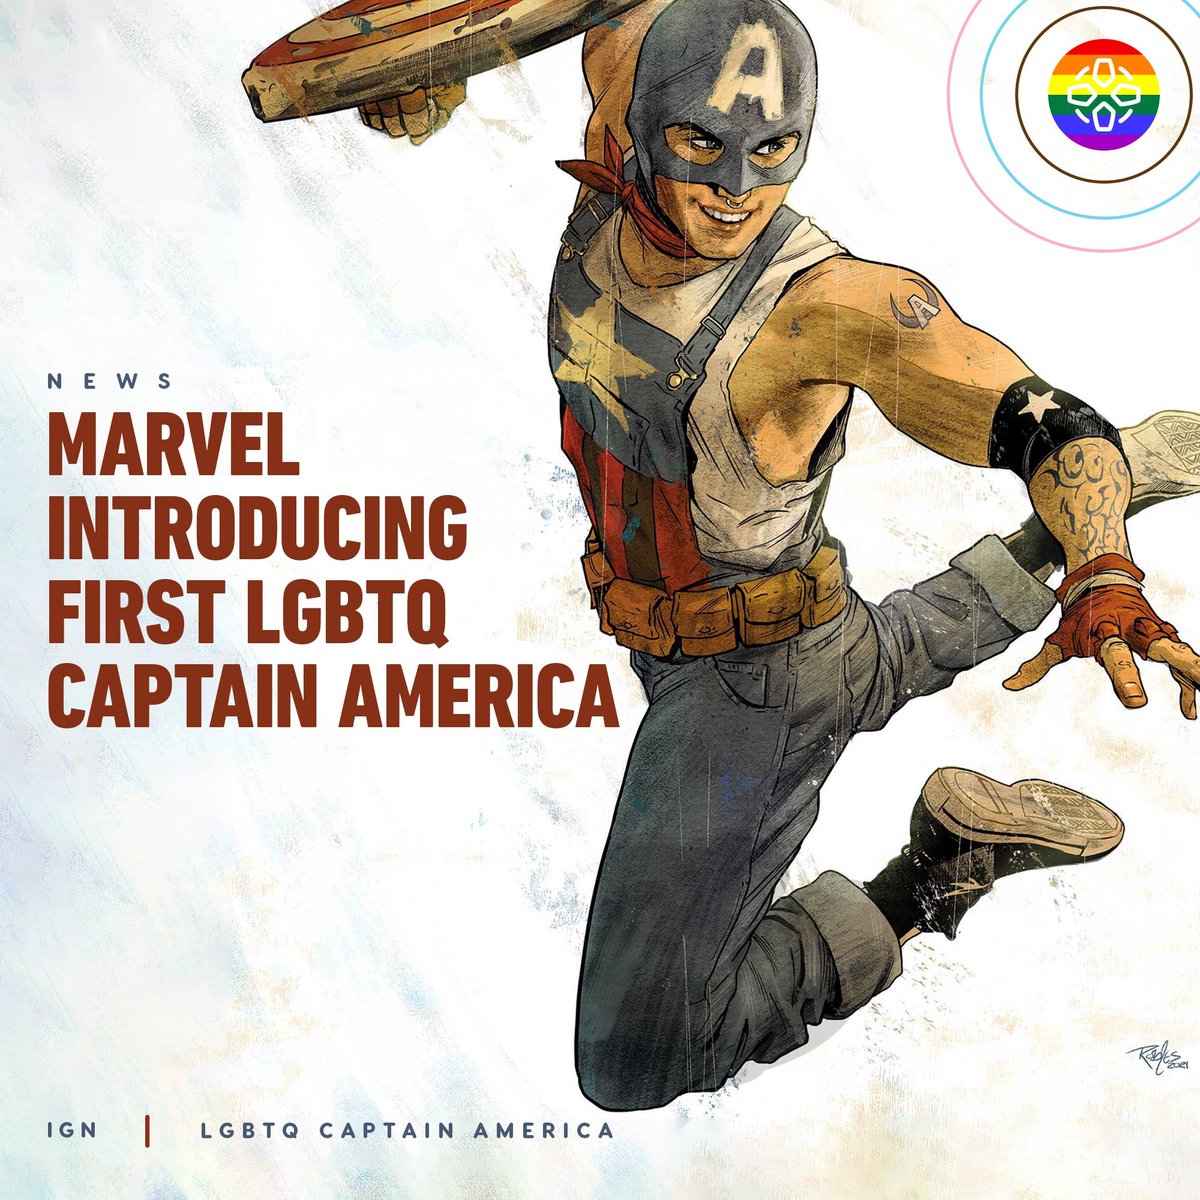 Create new characters, new hero's and new villains that are LGBTQ that we can love reading about. Do not do this. #Marvel #CaptainAmerica